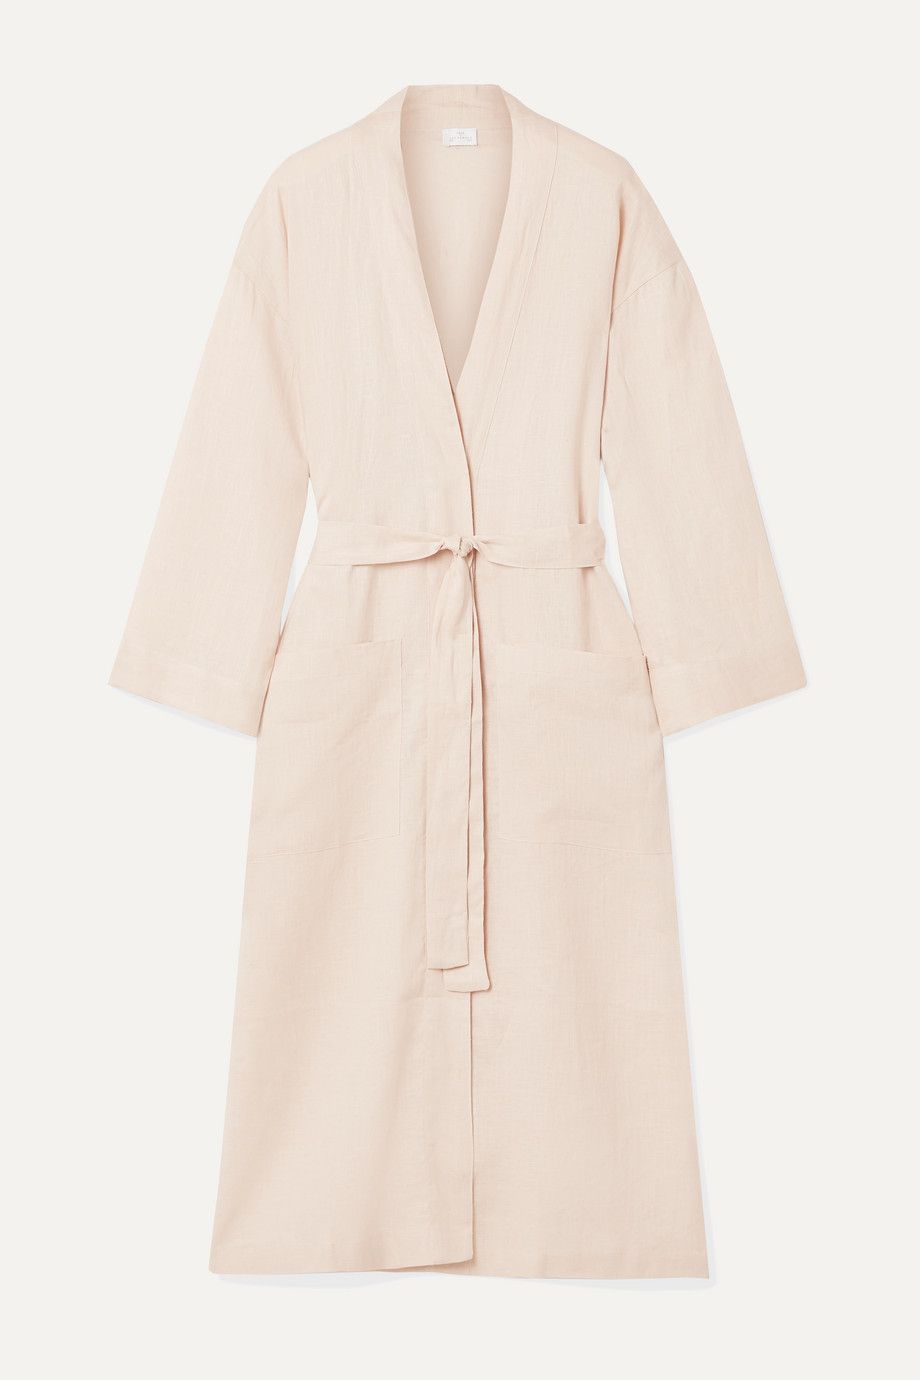 10+ Best Robes for Women - Stylish Bathrobes for Women to Wear